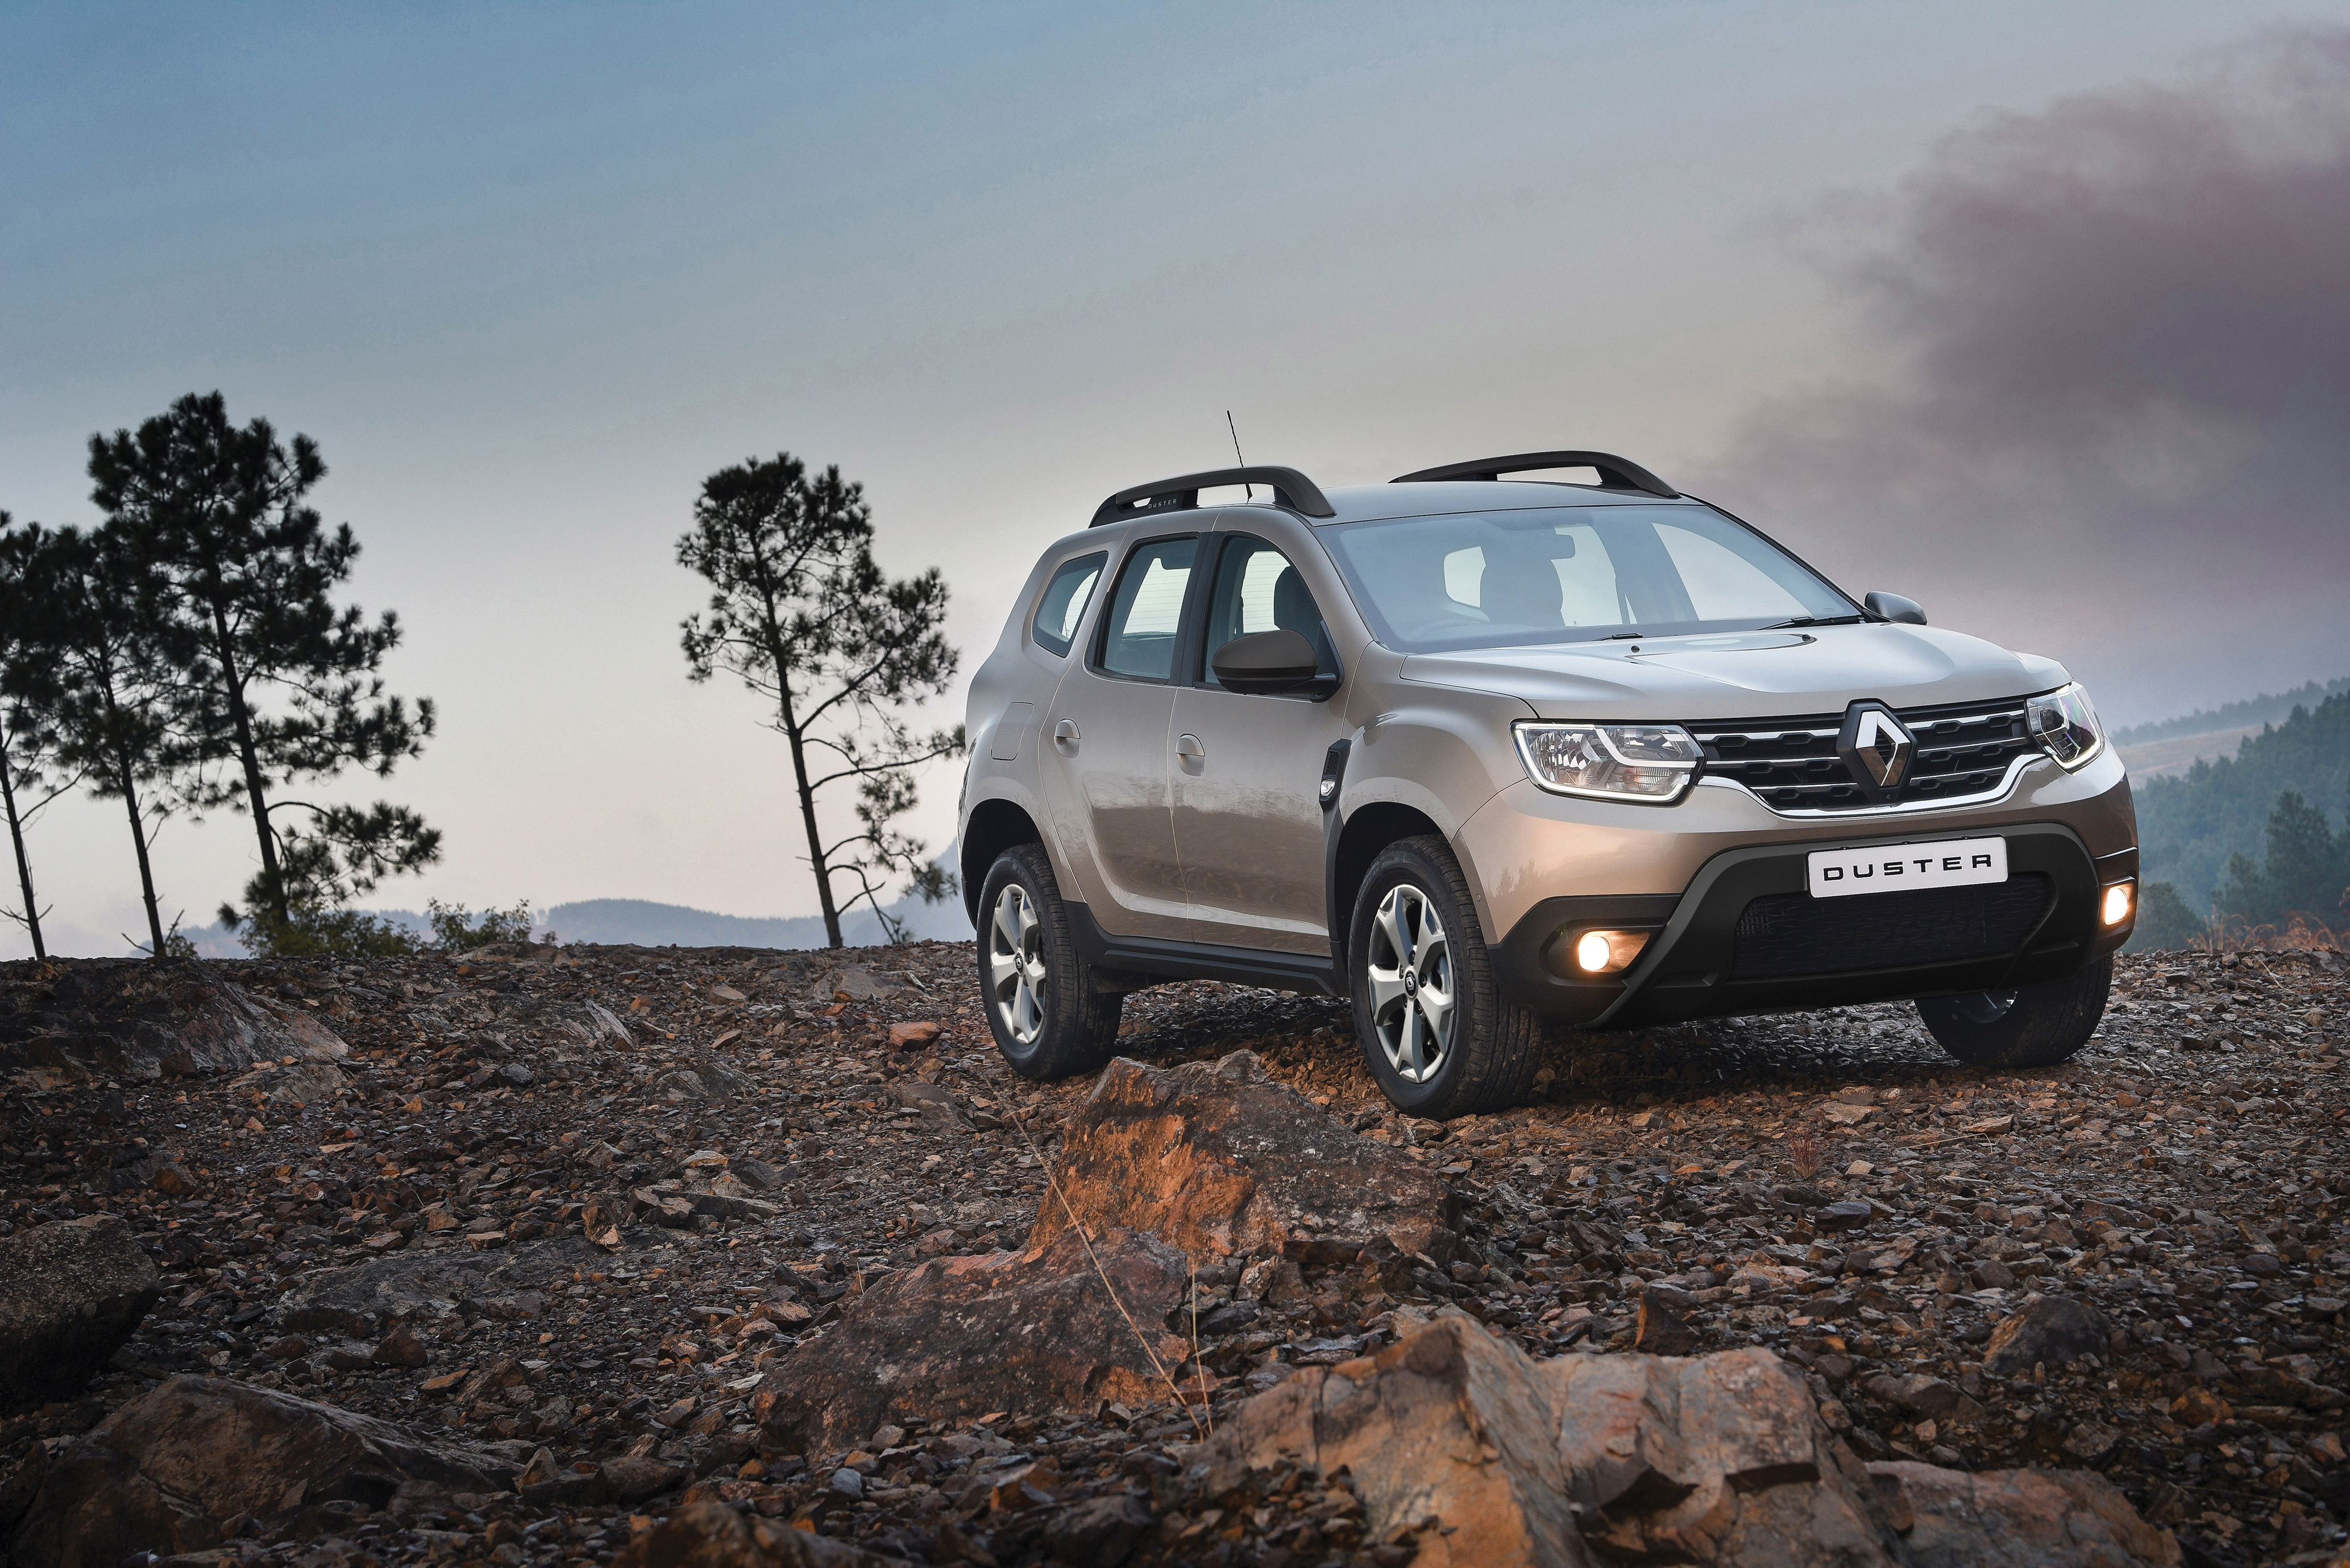 10 Dacia Duster HD Wallpapers and Backgrounds 4134x2759